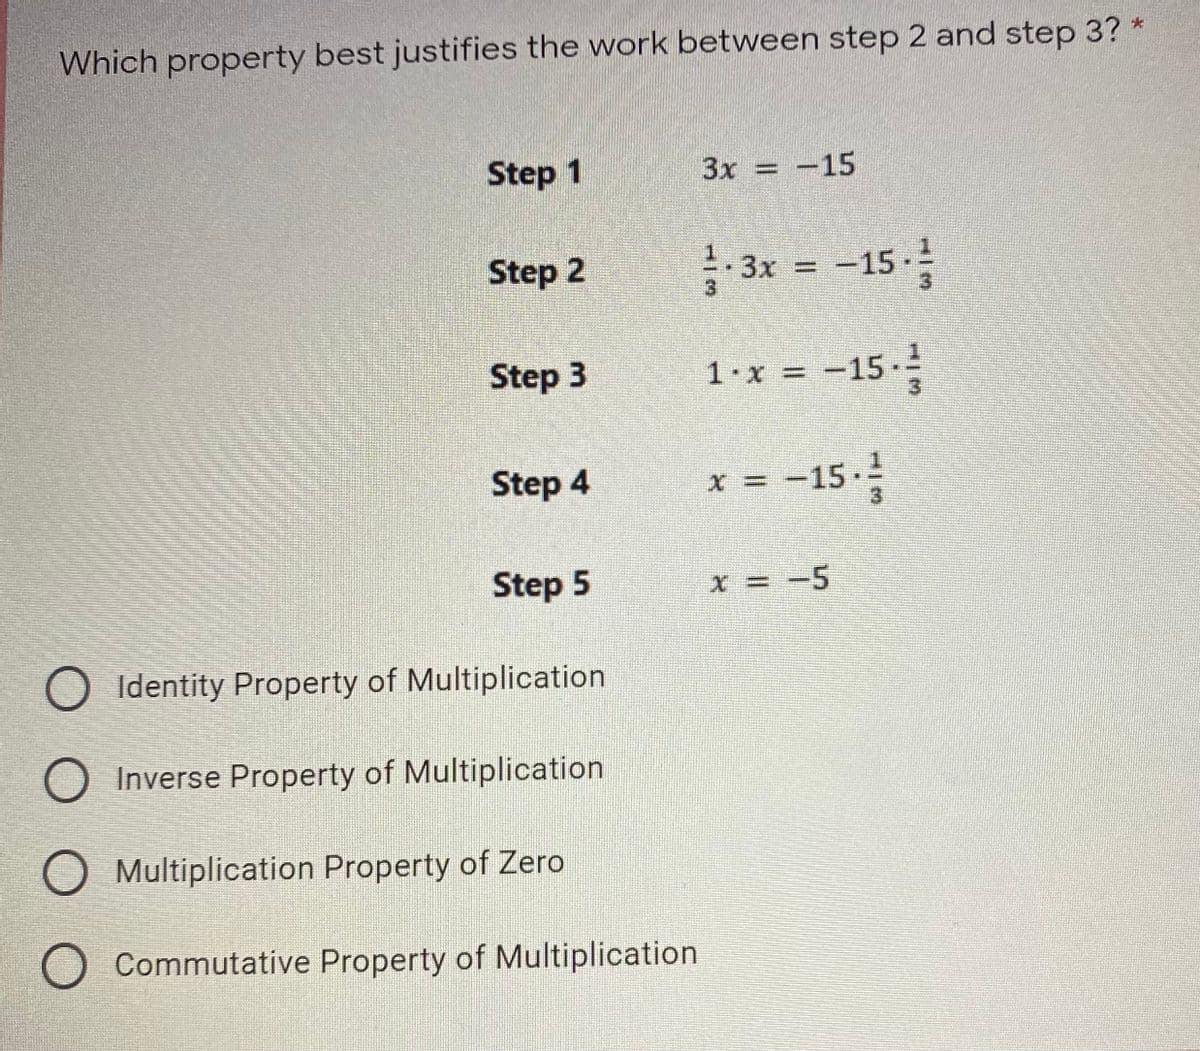 Which property best justifies the work between step 2 and step 3? *
Step 1
3x = -15
-15 -
Step 2
.3x =
Step 3
1.x = -15
Step 4
= -15-
Step 5
X = -5
O Identity Property of Multiplication
O Inverse Property of Multiplication
O Multiplication Property of Zero
O Commutative Property of Multiplication
